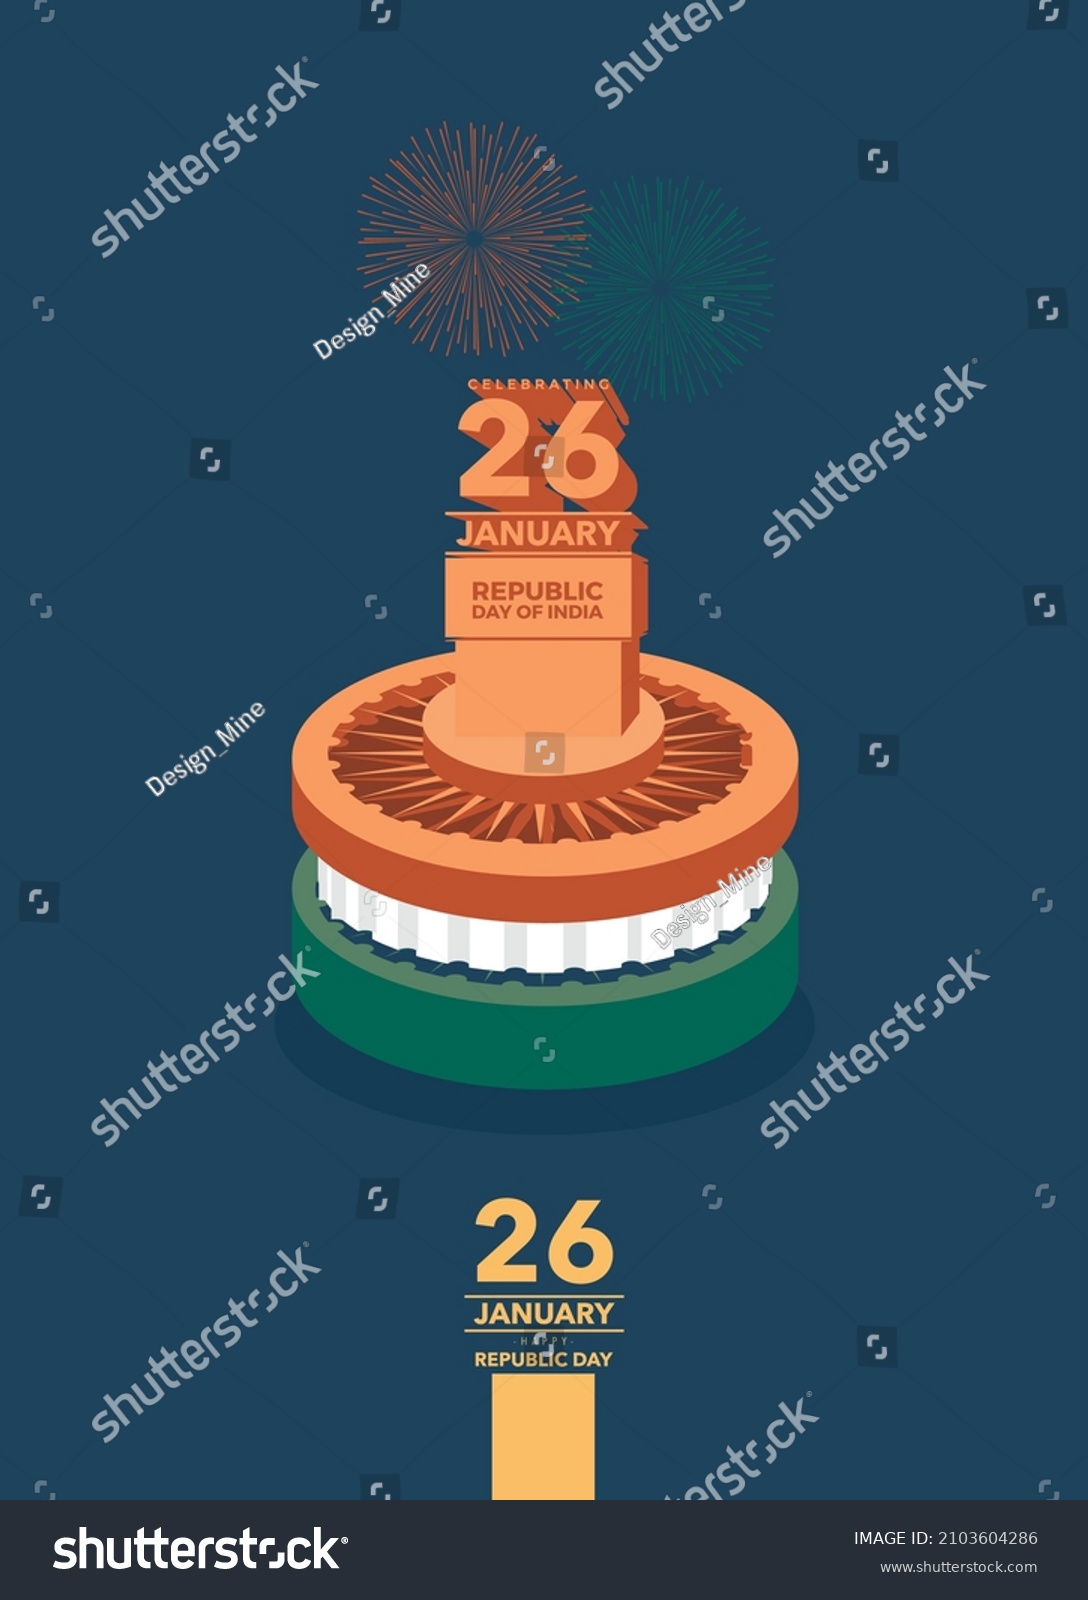 SVG of Celebrating the 26 January A Republic day of India. Creative design for posters, banners, advertising, etc. Happy Independence Day. Tricolor Indian Parliament. Editable svg